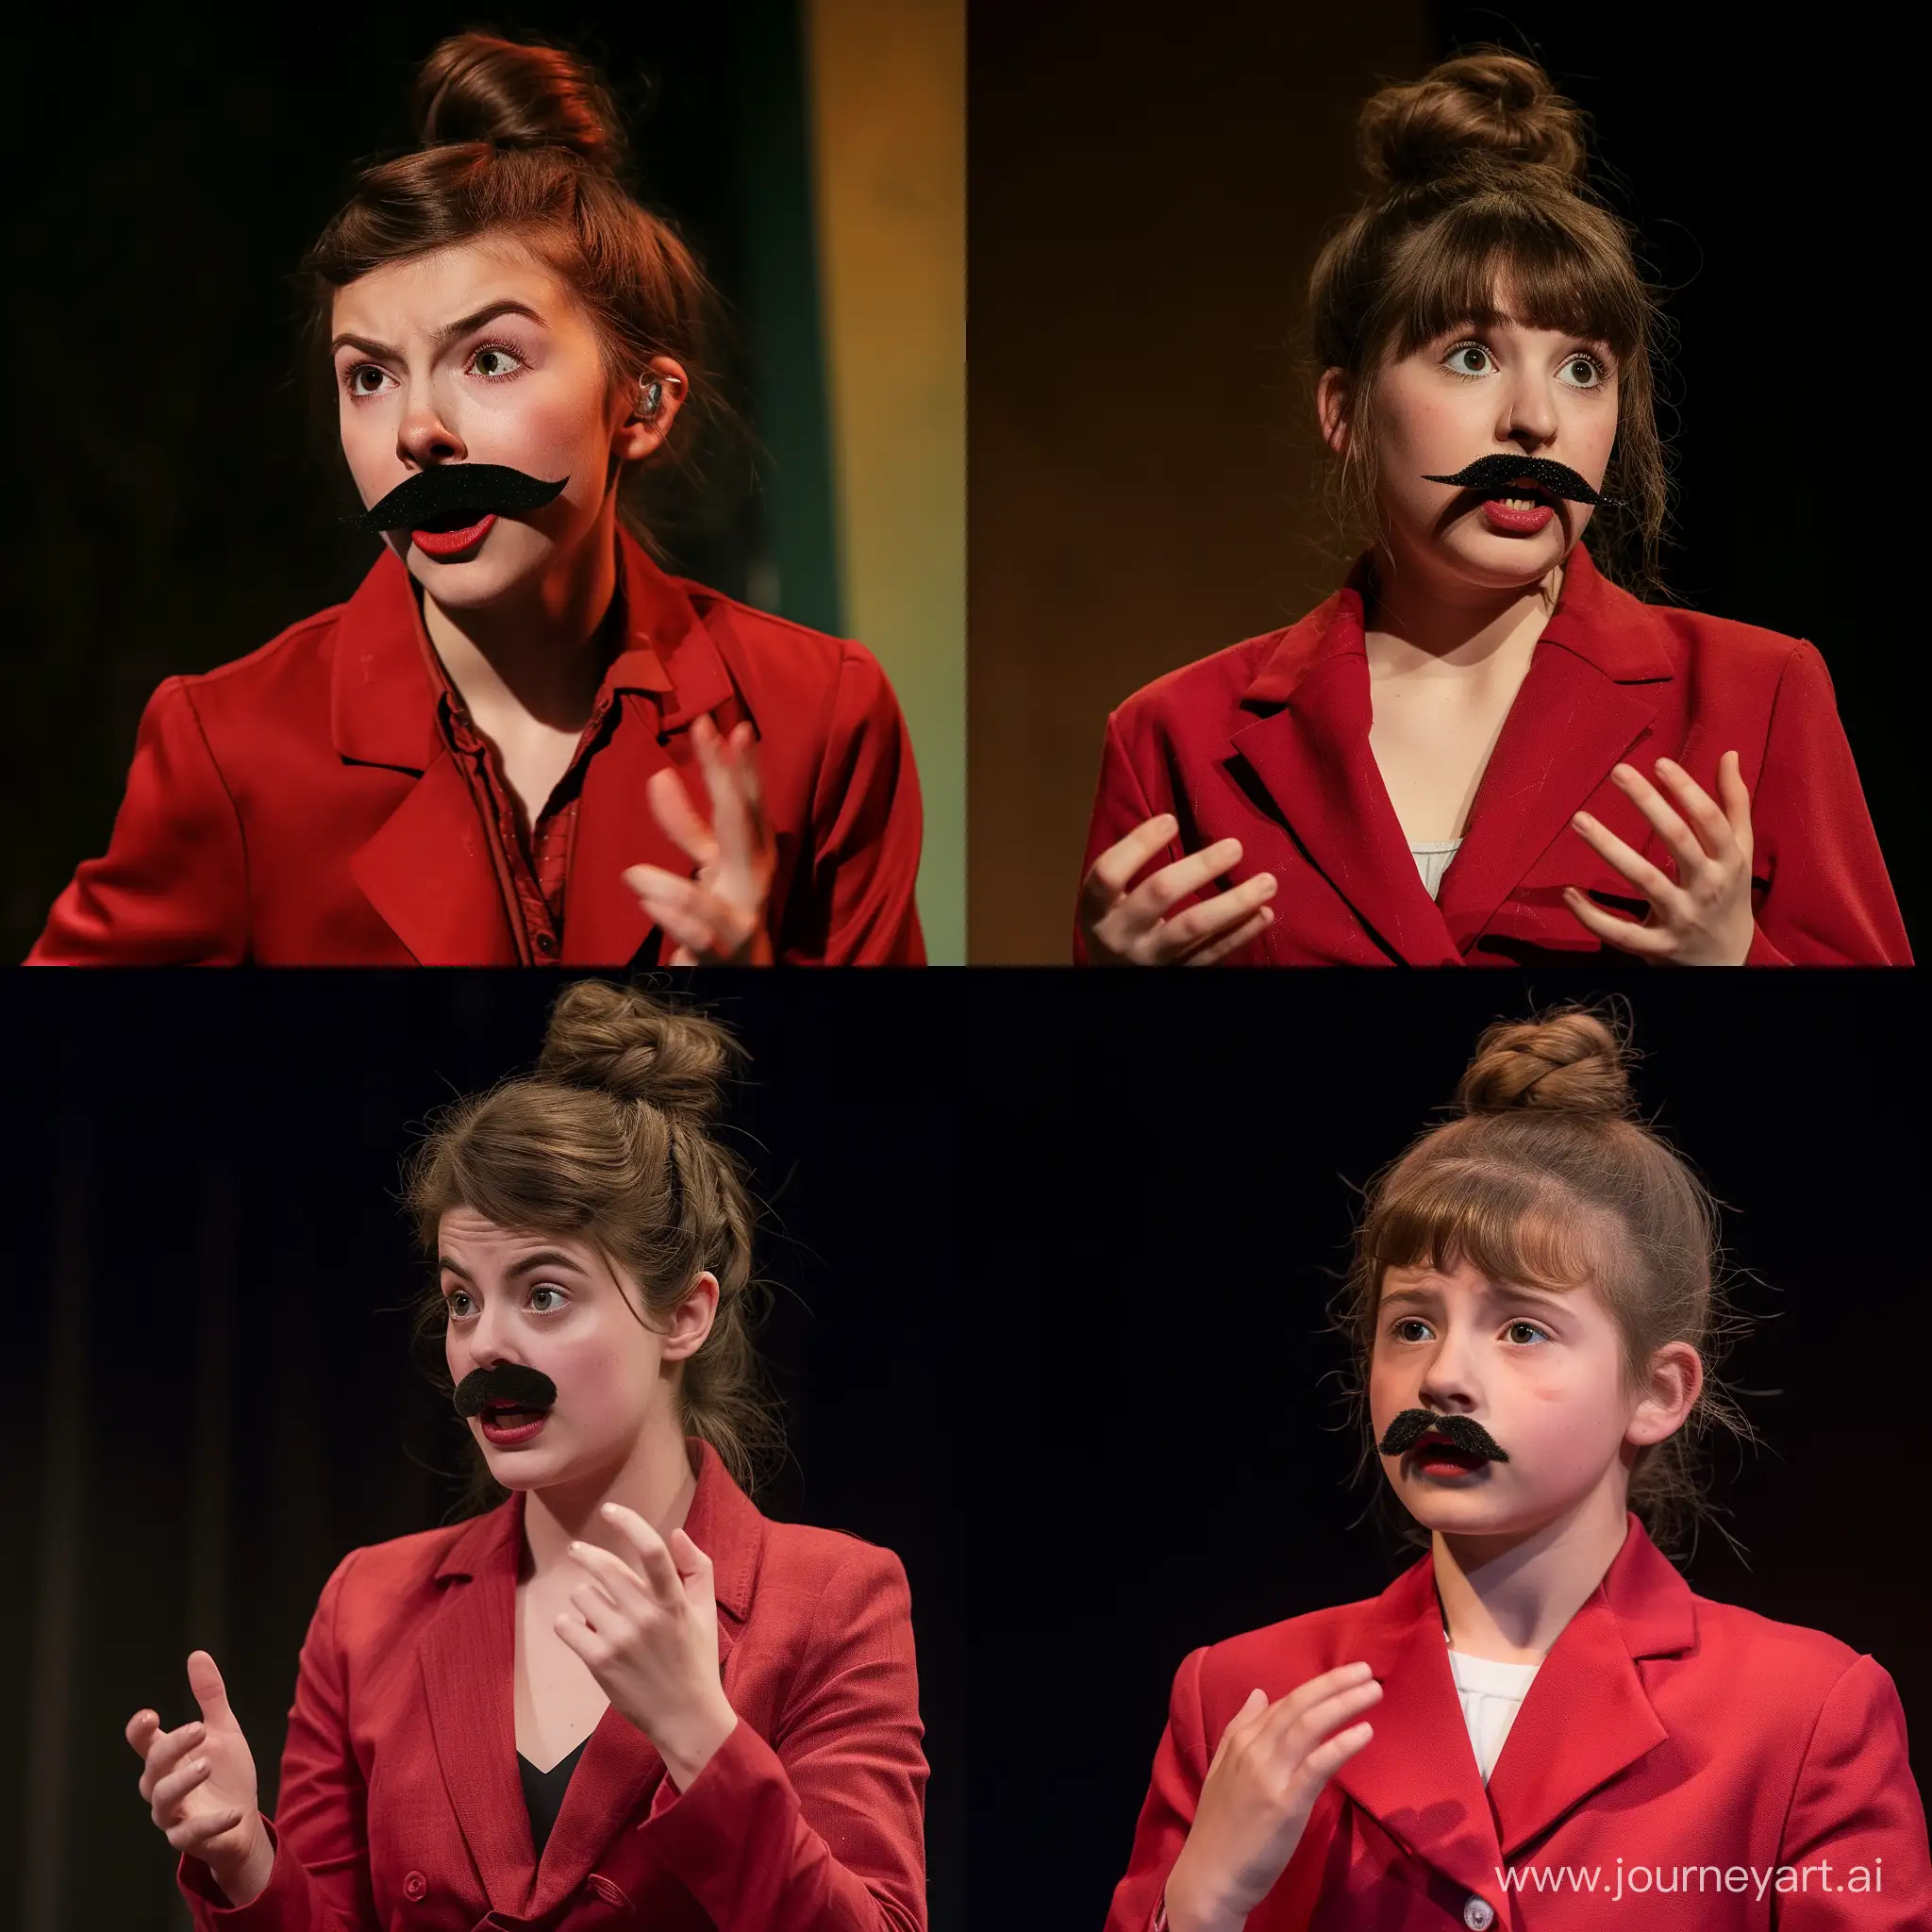 Confident-Actress-with-Brown-Hair-and-Fake-Mustache-Captivates-Audience-in-Red-Suit